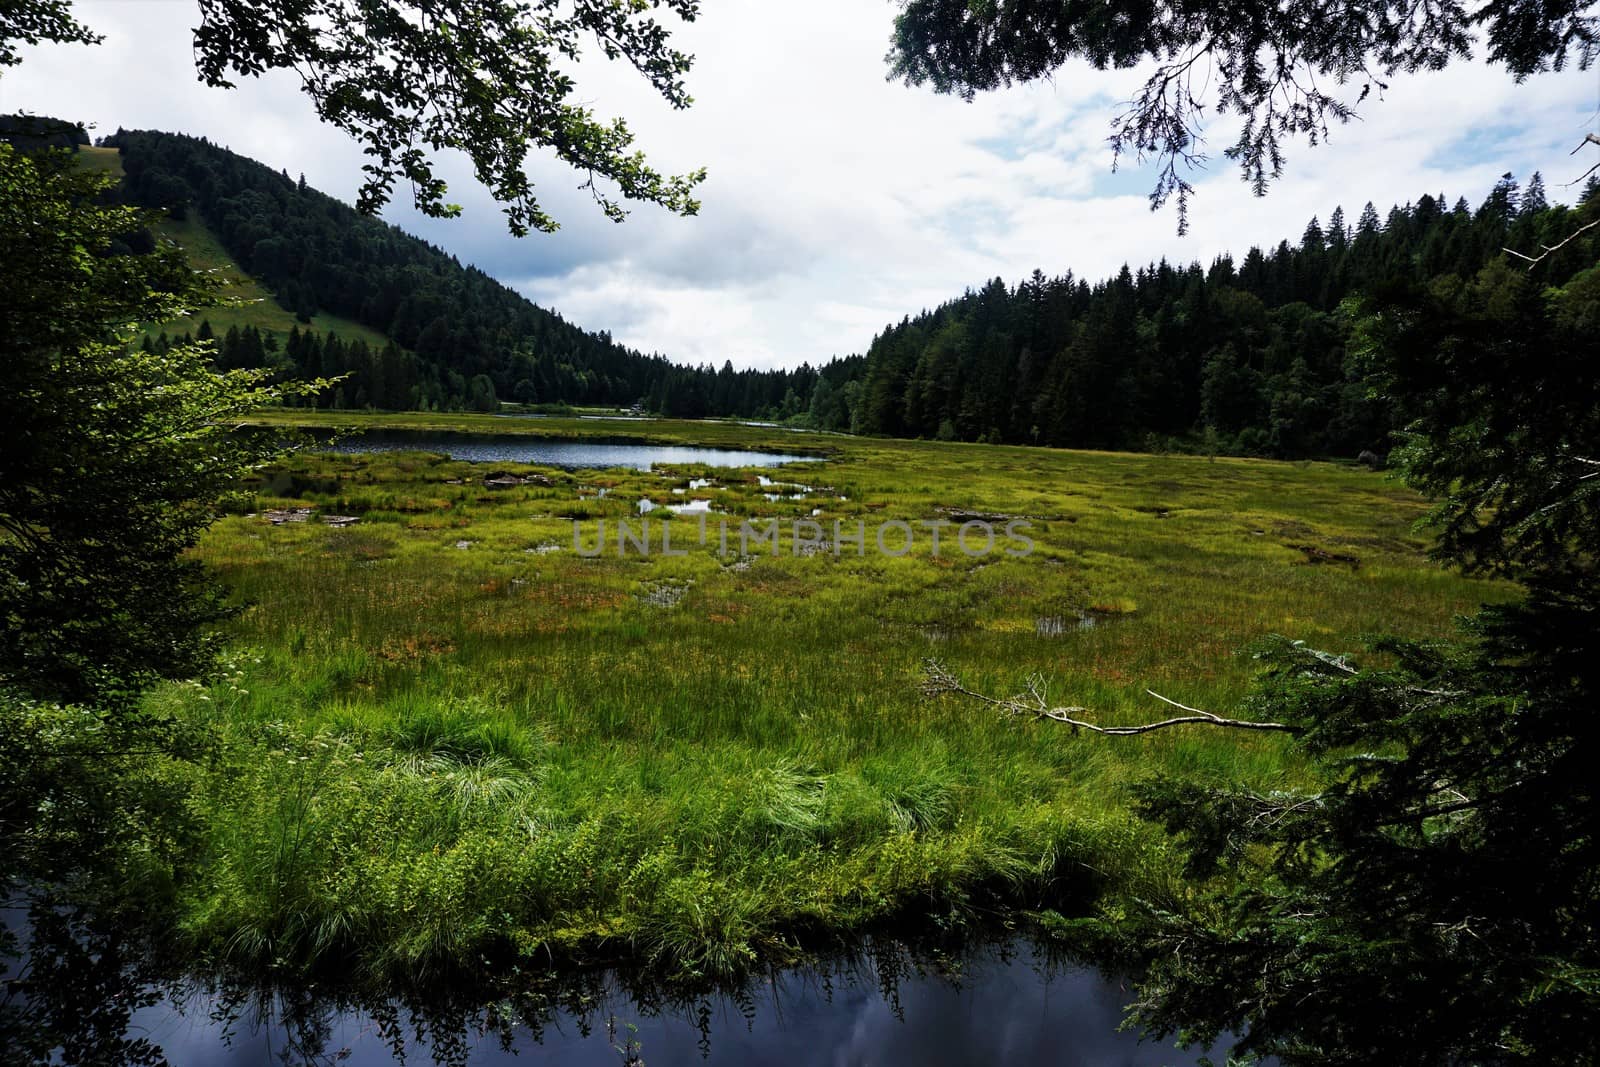 Panoramic view over Lac de Lispach in the Vosges near La Bresse, France